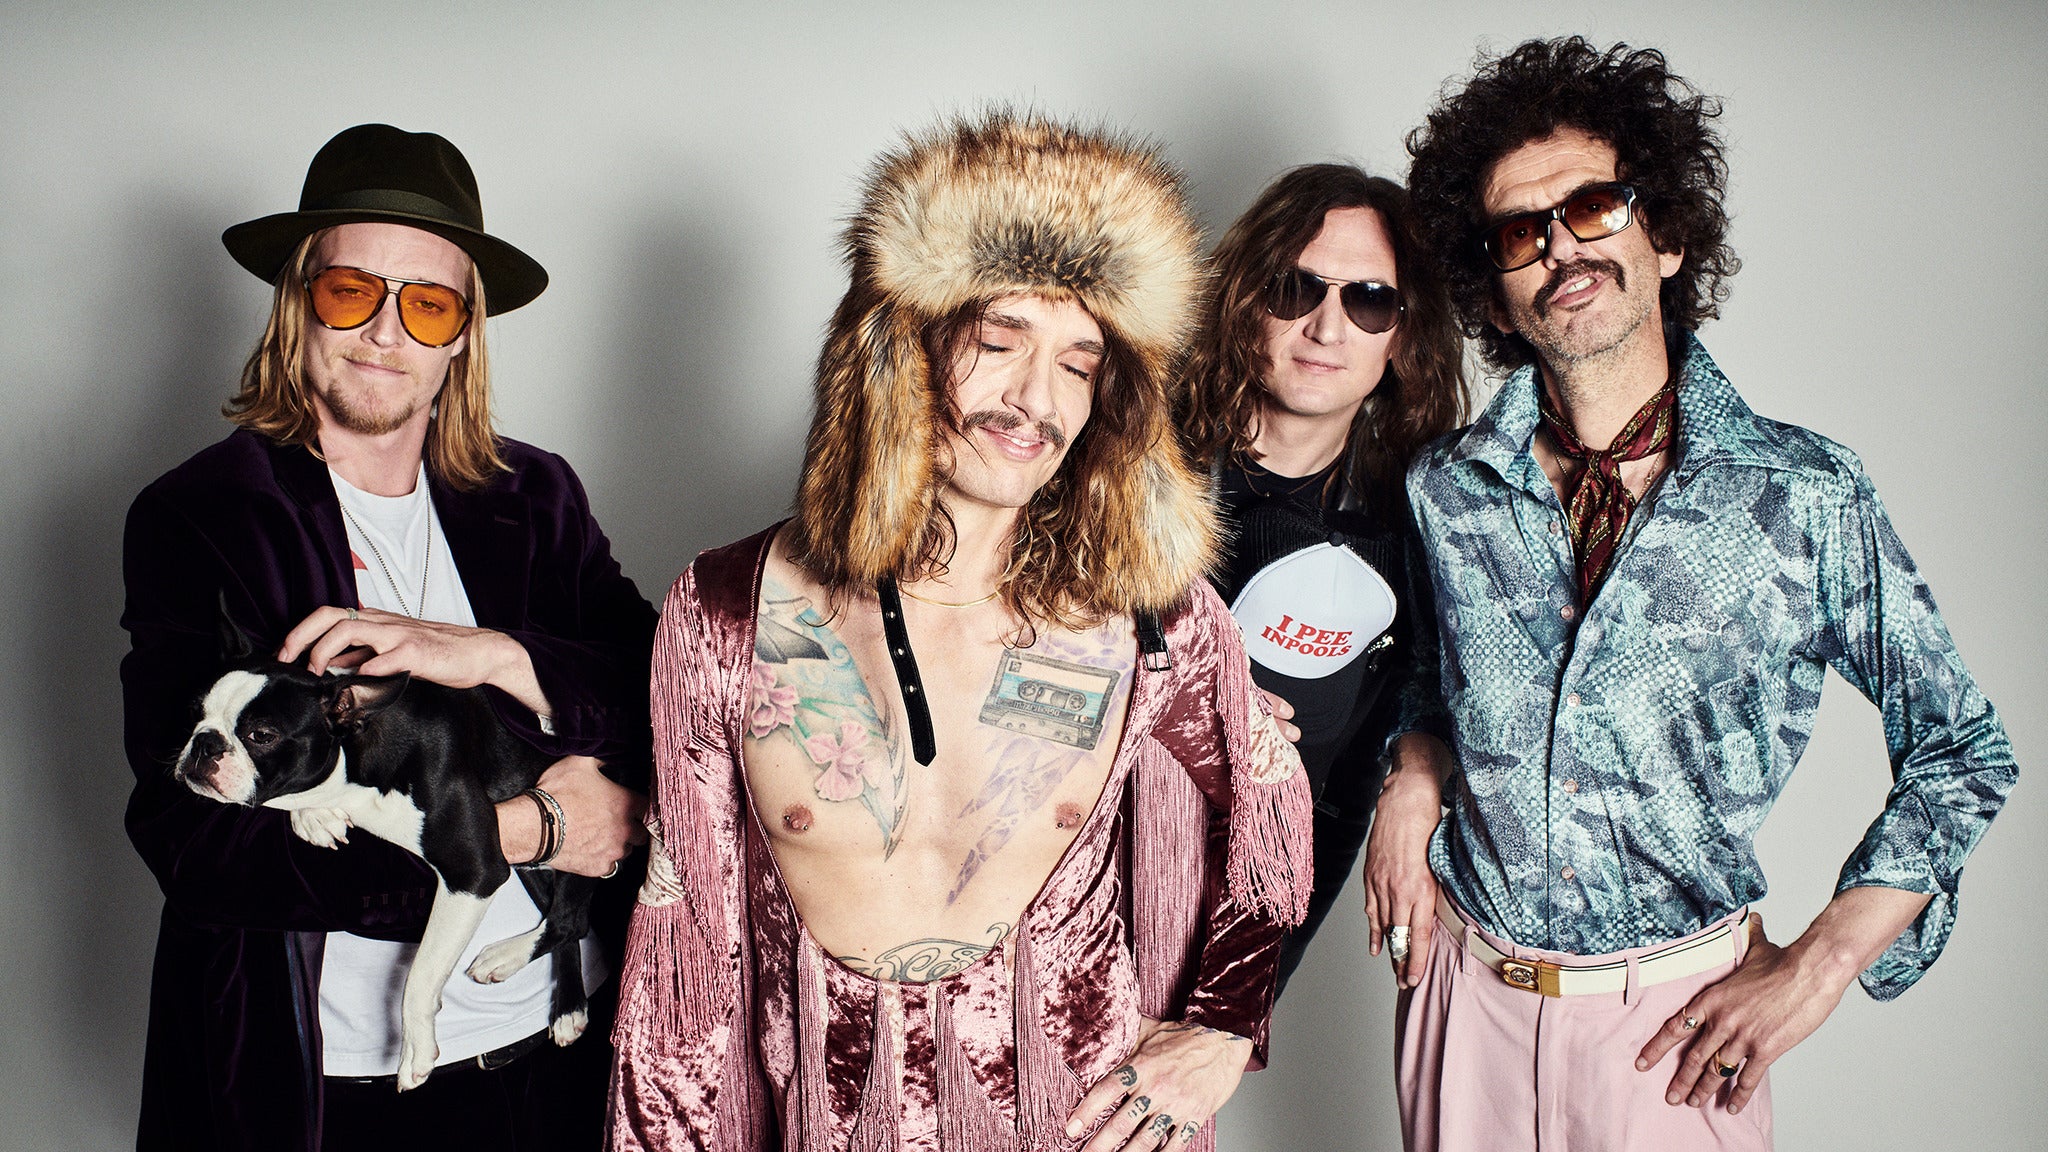 THE DARKNESS: Permission to Land 20 presale code for advance tickets in Sacramento